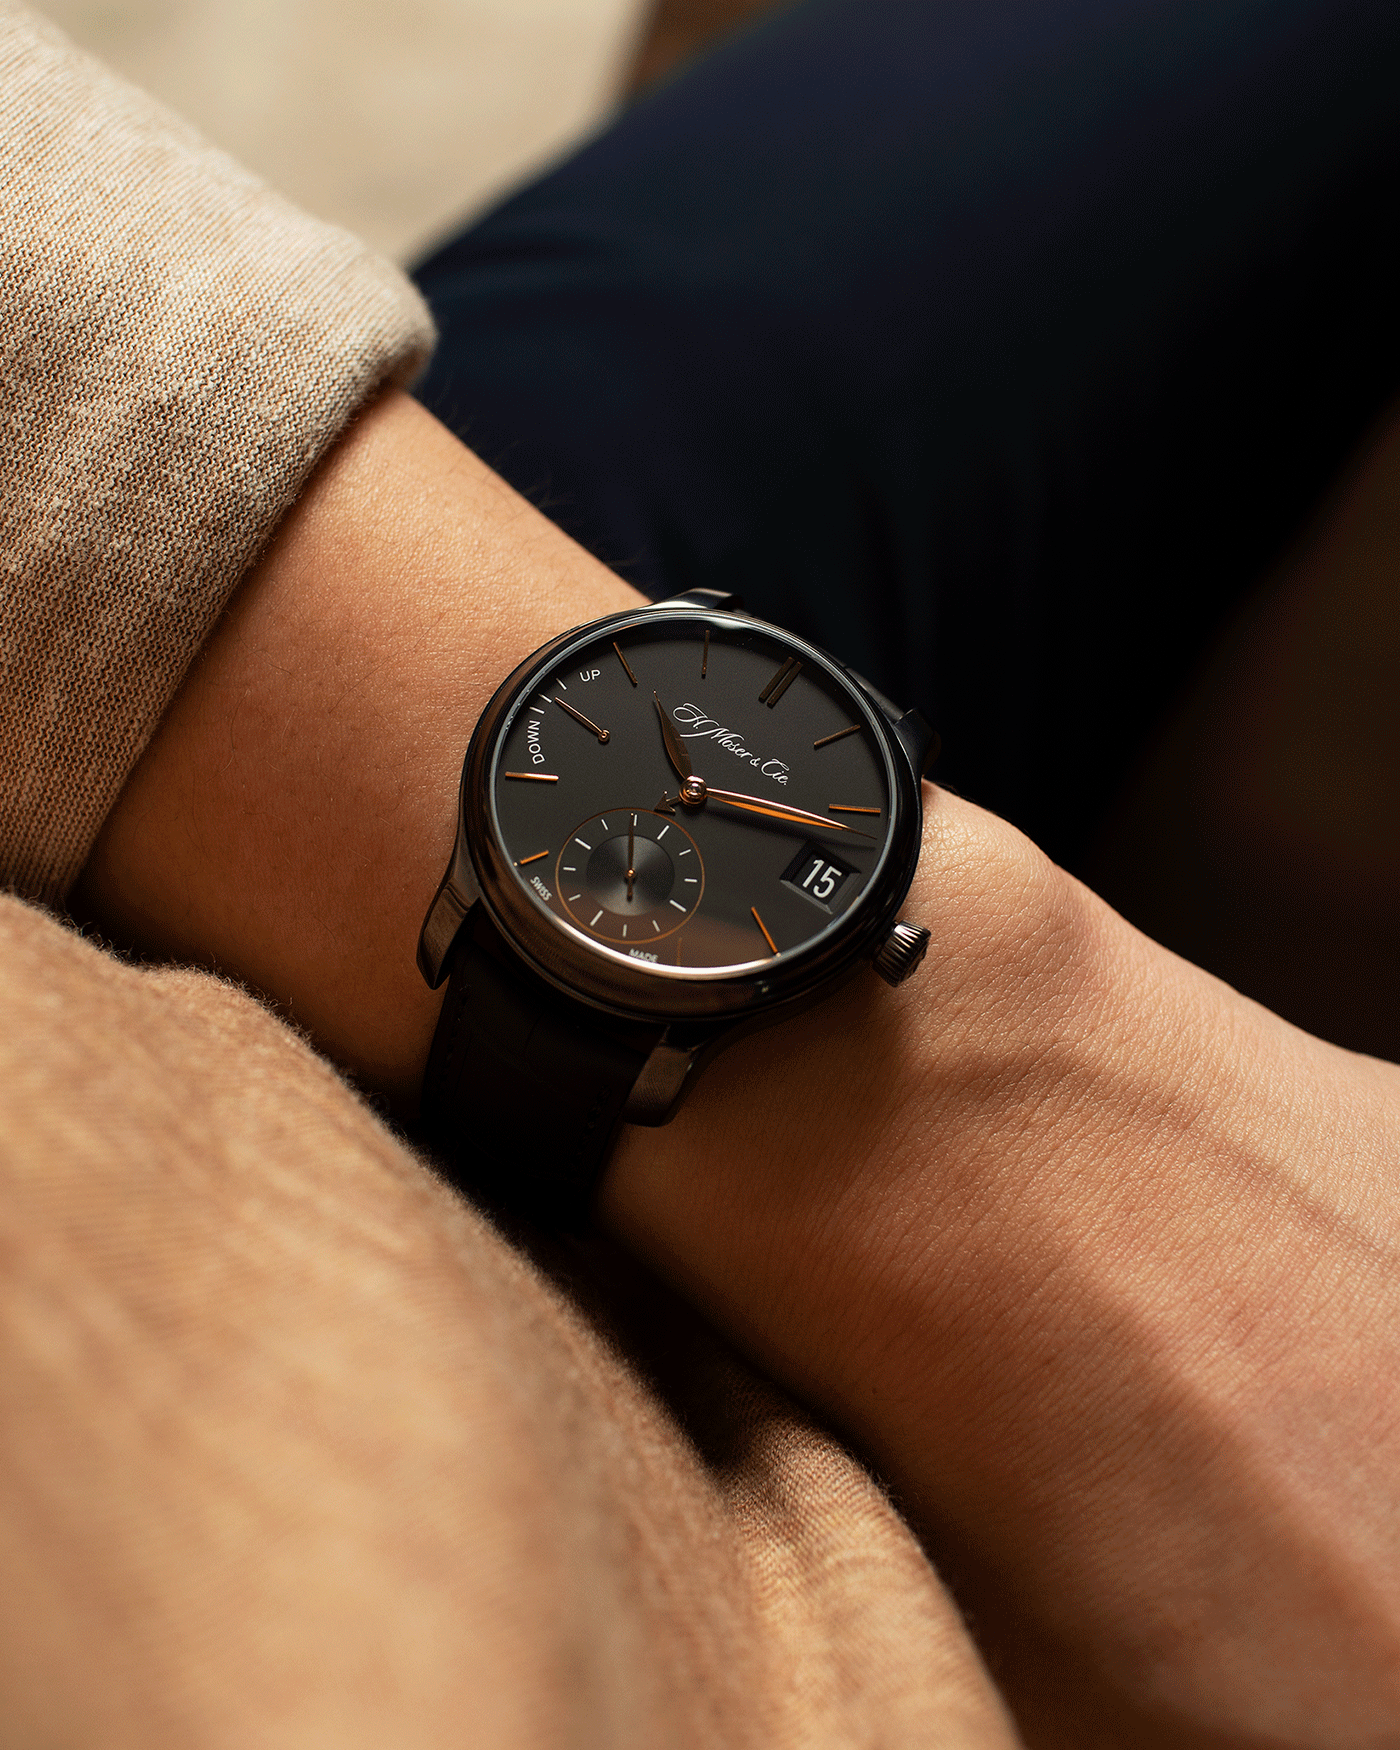 Brand: H.Moser & Cie Year: 2020 Model: Endeavour Perpetual Black Edition Reference Number: 341.050-020 Material: DLC Treated Titanium Movement: Manually wound Caliber HMC 341 Case Diameter: 40.8mm Bracelet/Strap: H. Moser & Cie Black Alligator Leather Strap with matching DLC Coated Titanium Tang Buckle